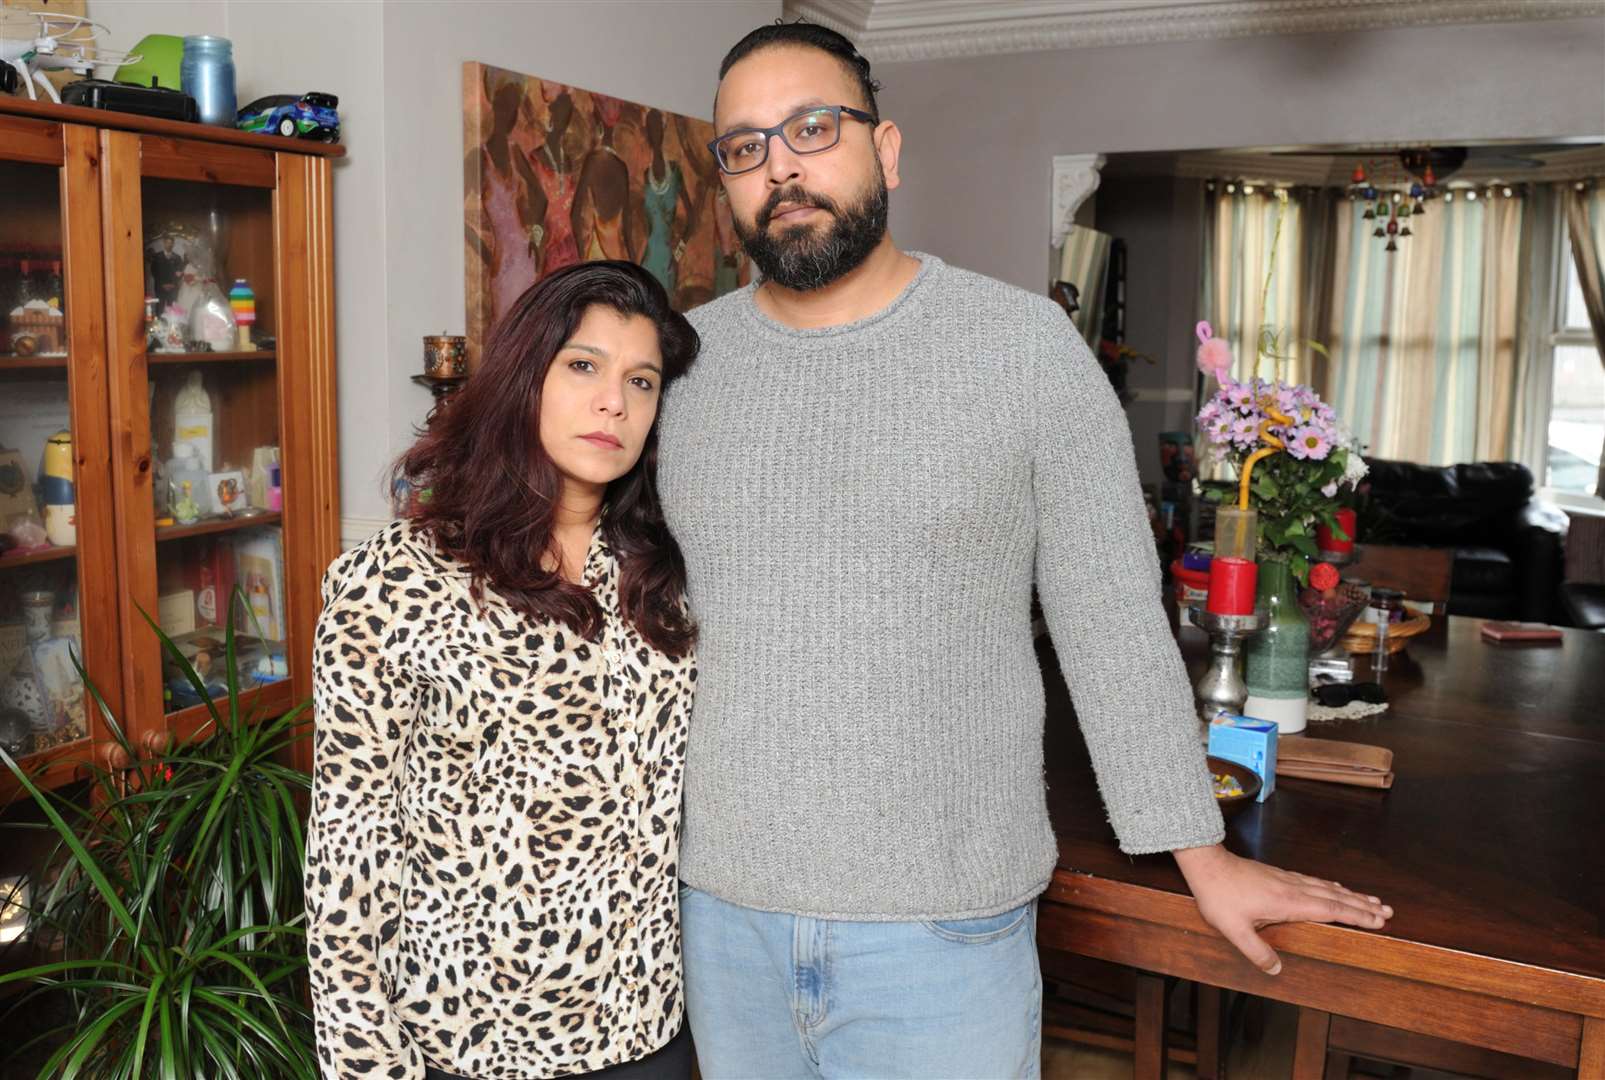 The couple say their daughters have been left "terrified"